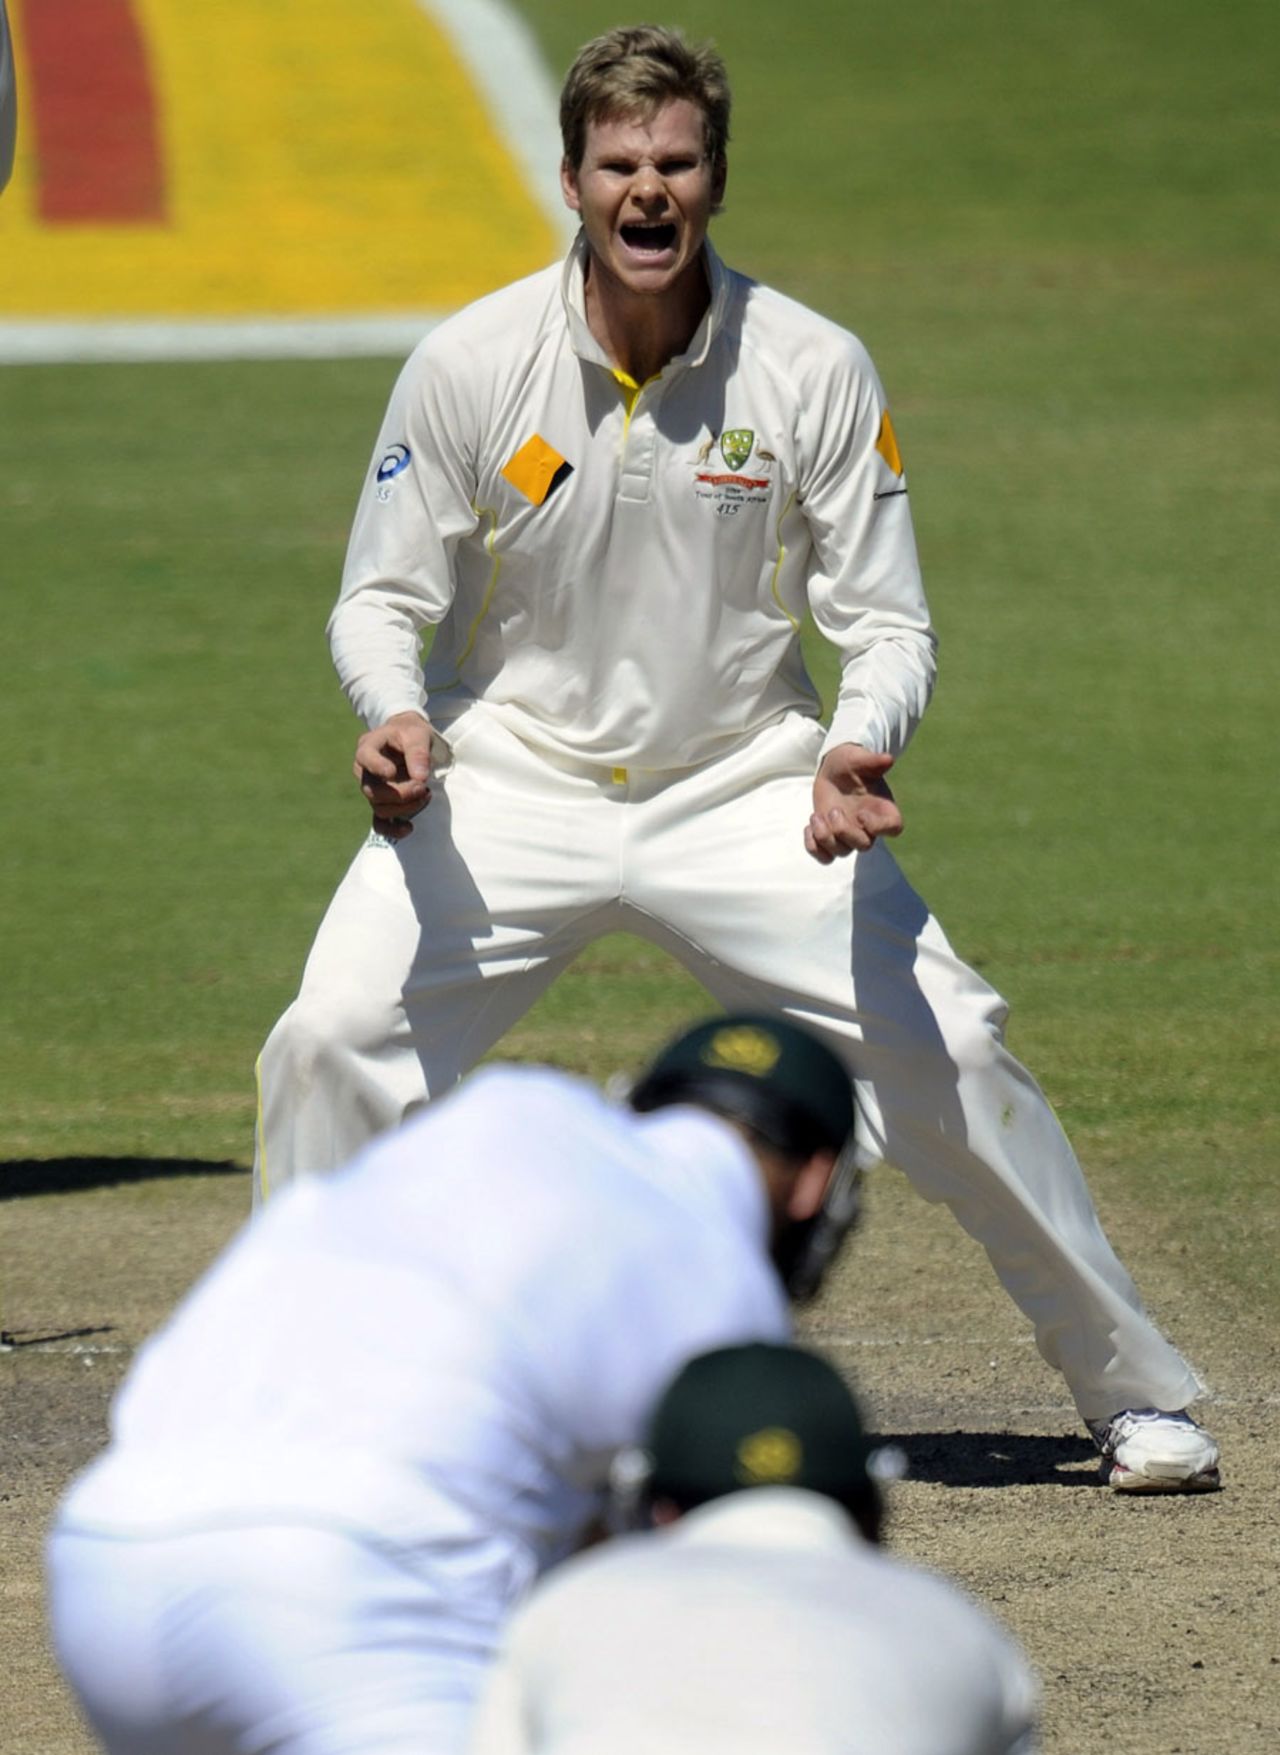 Steven Smith picked up the crucial wicket of Faf du Plessis, South Africa v Australia, 3rd Test, Cape Town, 5th day, March 5, 2014